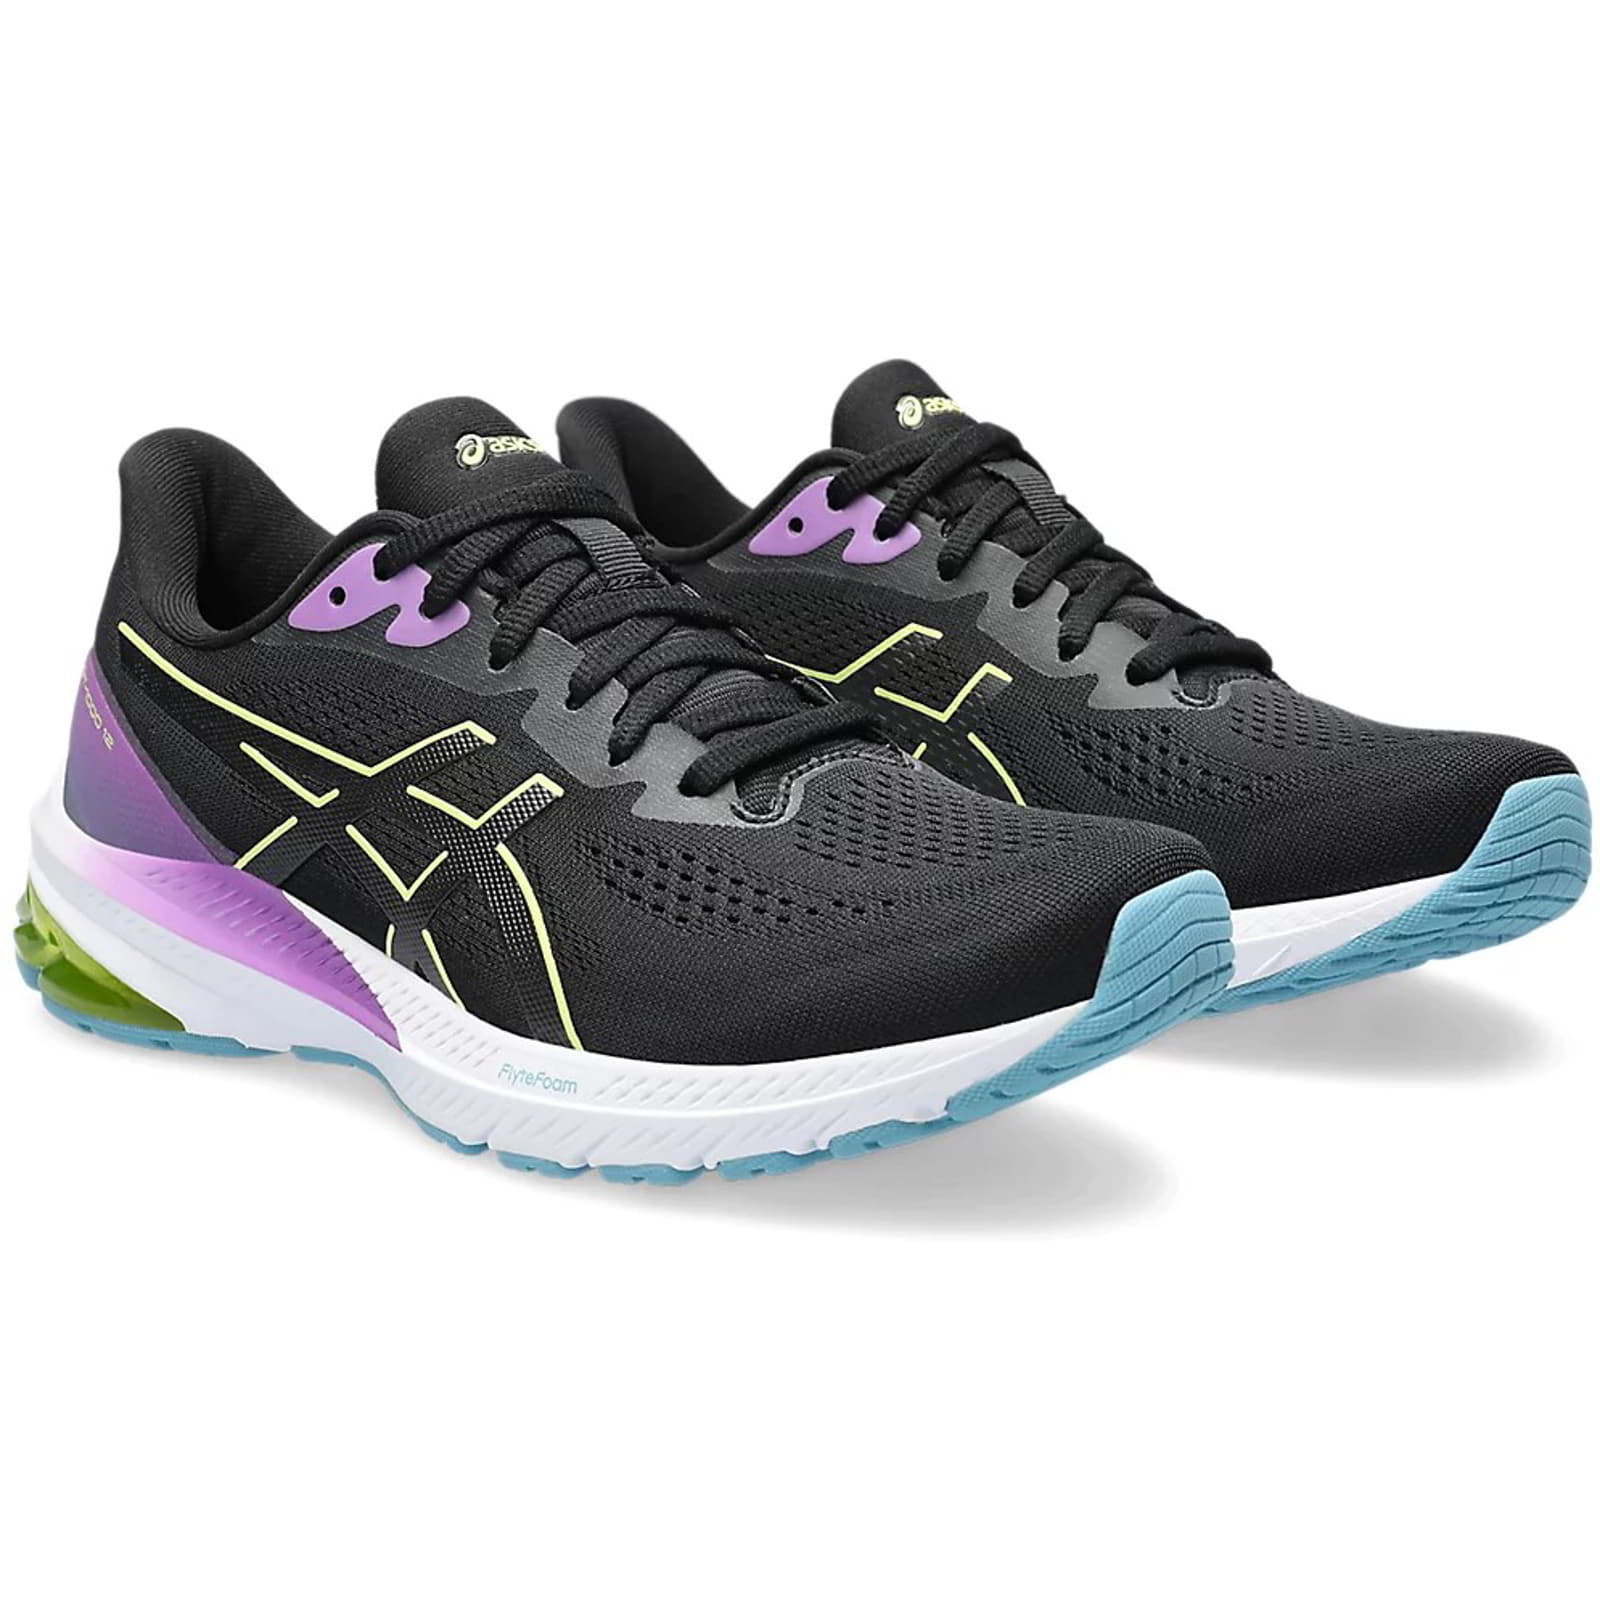 Asics Women's GT-1000 12 Running Shoes Trainers - UK 7